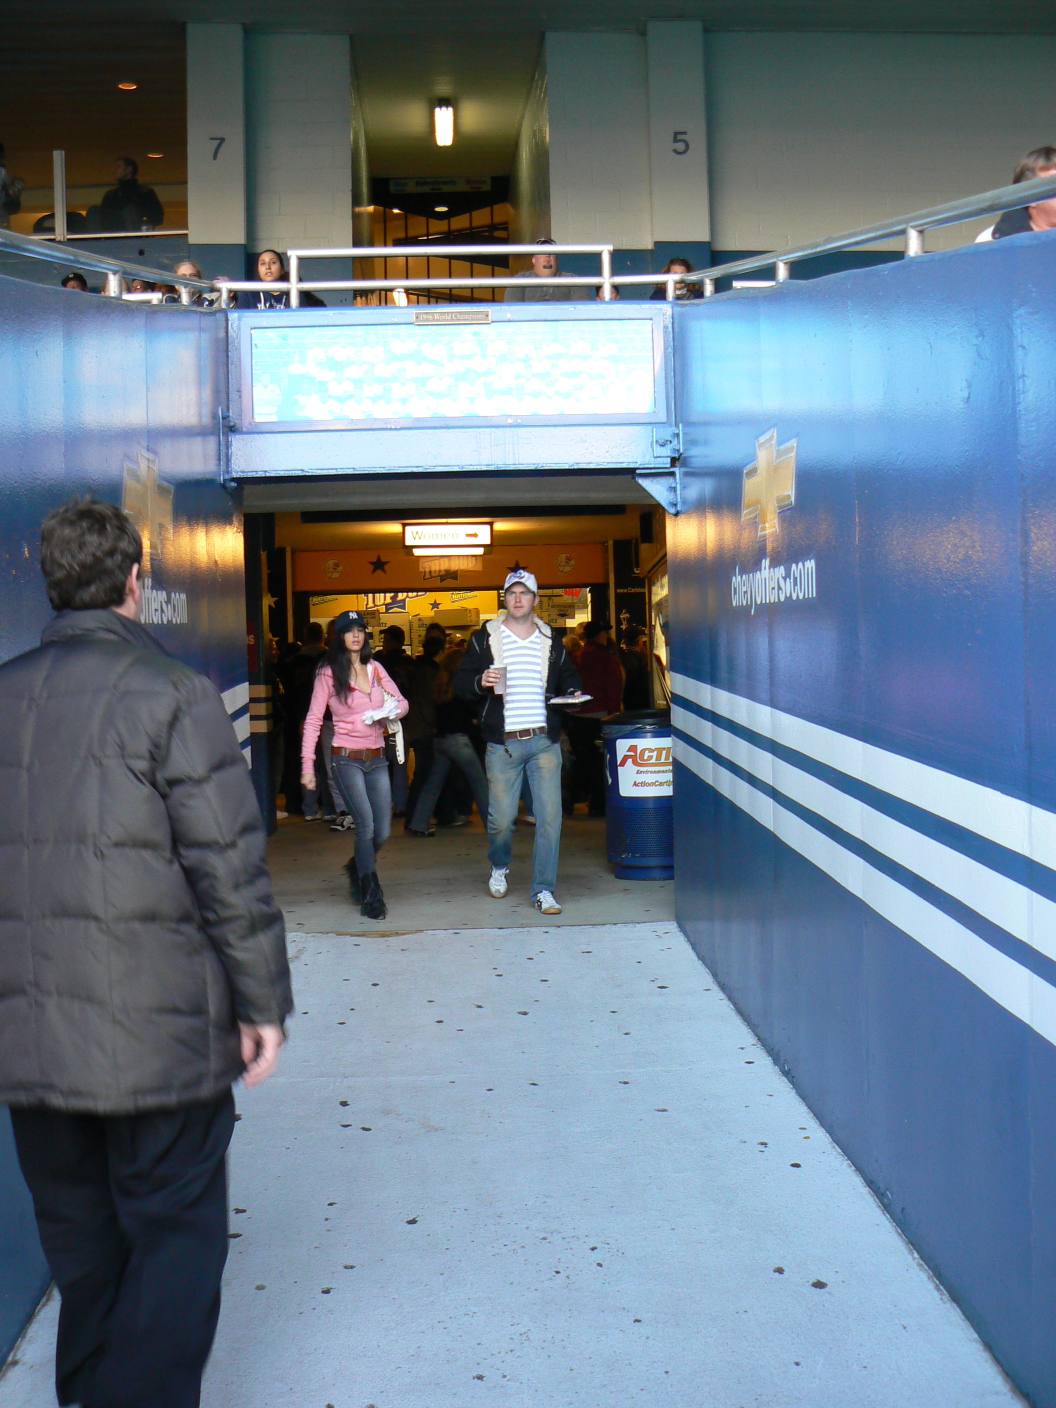 Walkway to the concessions